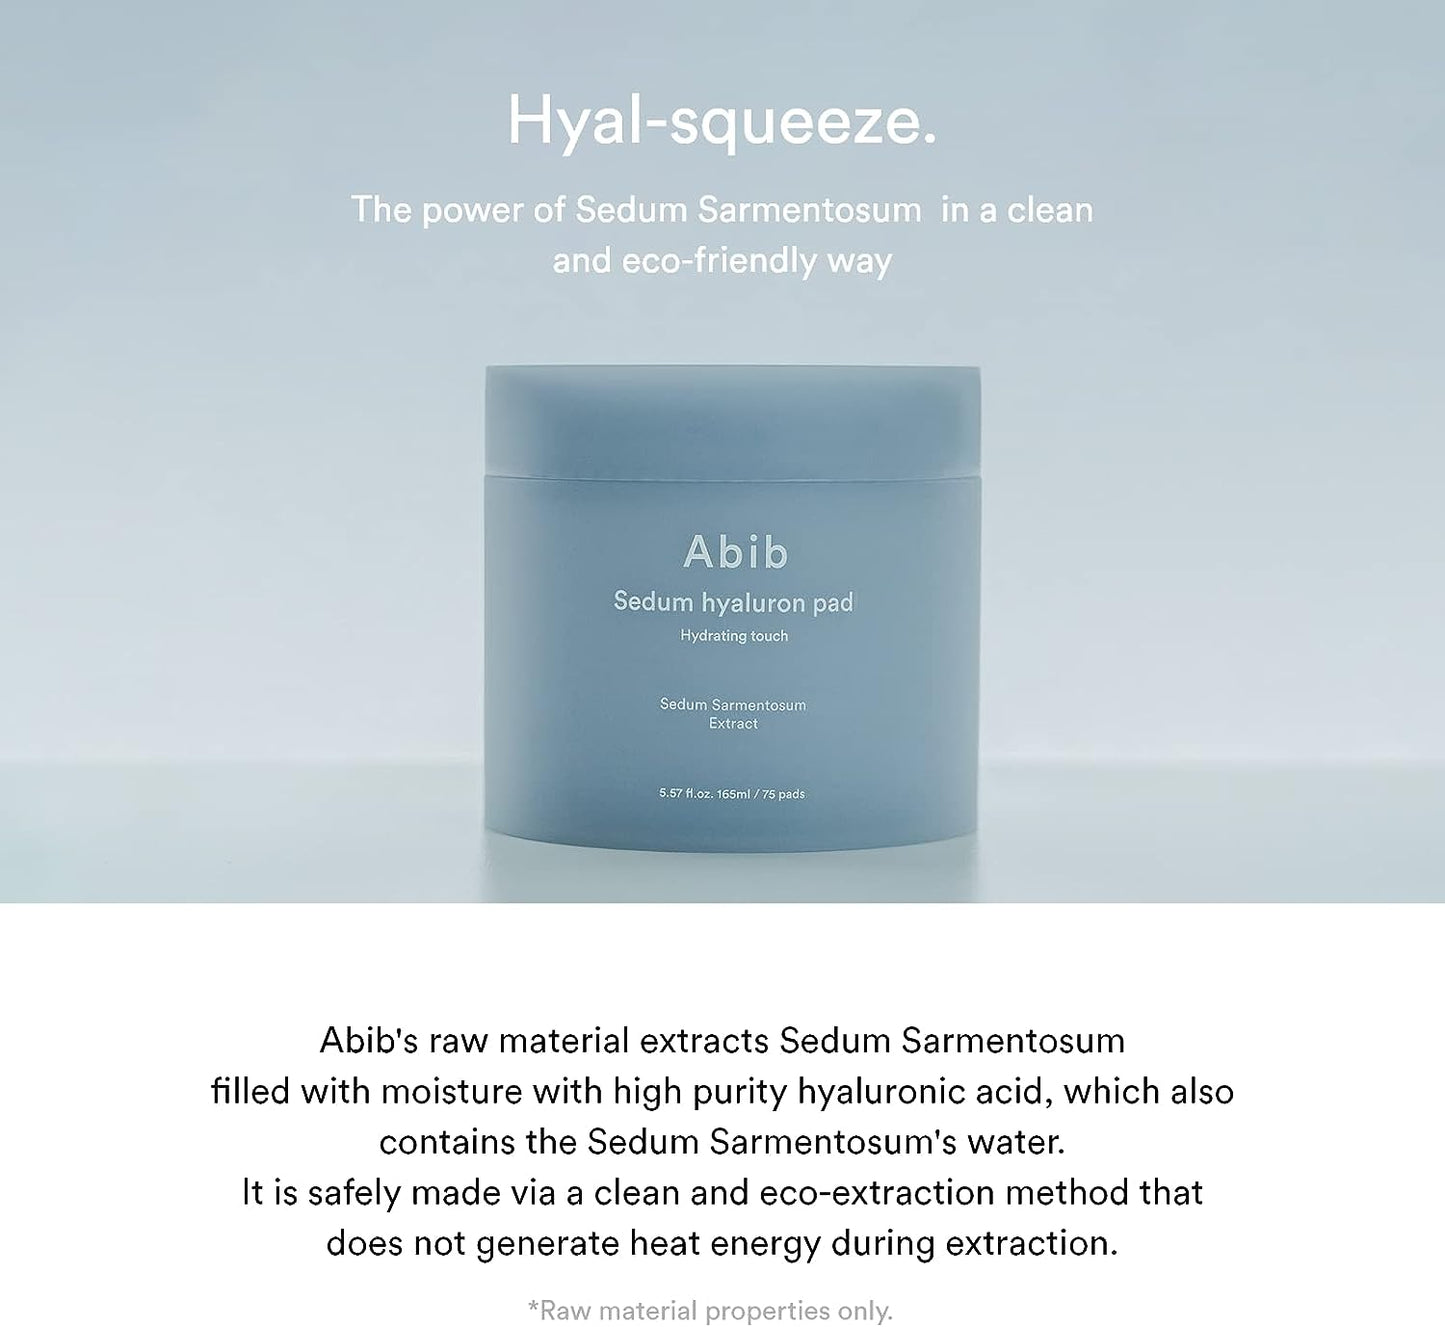 Abib Sedum Hyaluron Pad Hydrating Touch (75 Pads) I Hyaluronic Acid, Hydrating and Improving Skin Texture, Mild Exfoliation